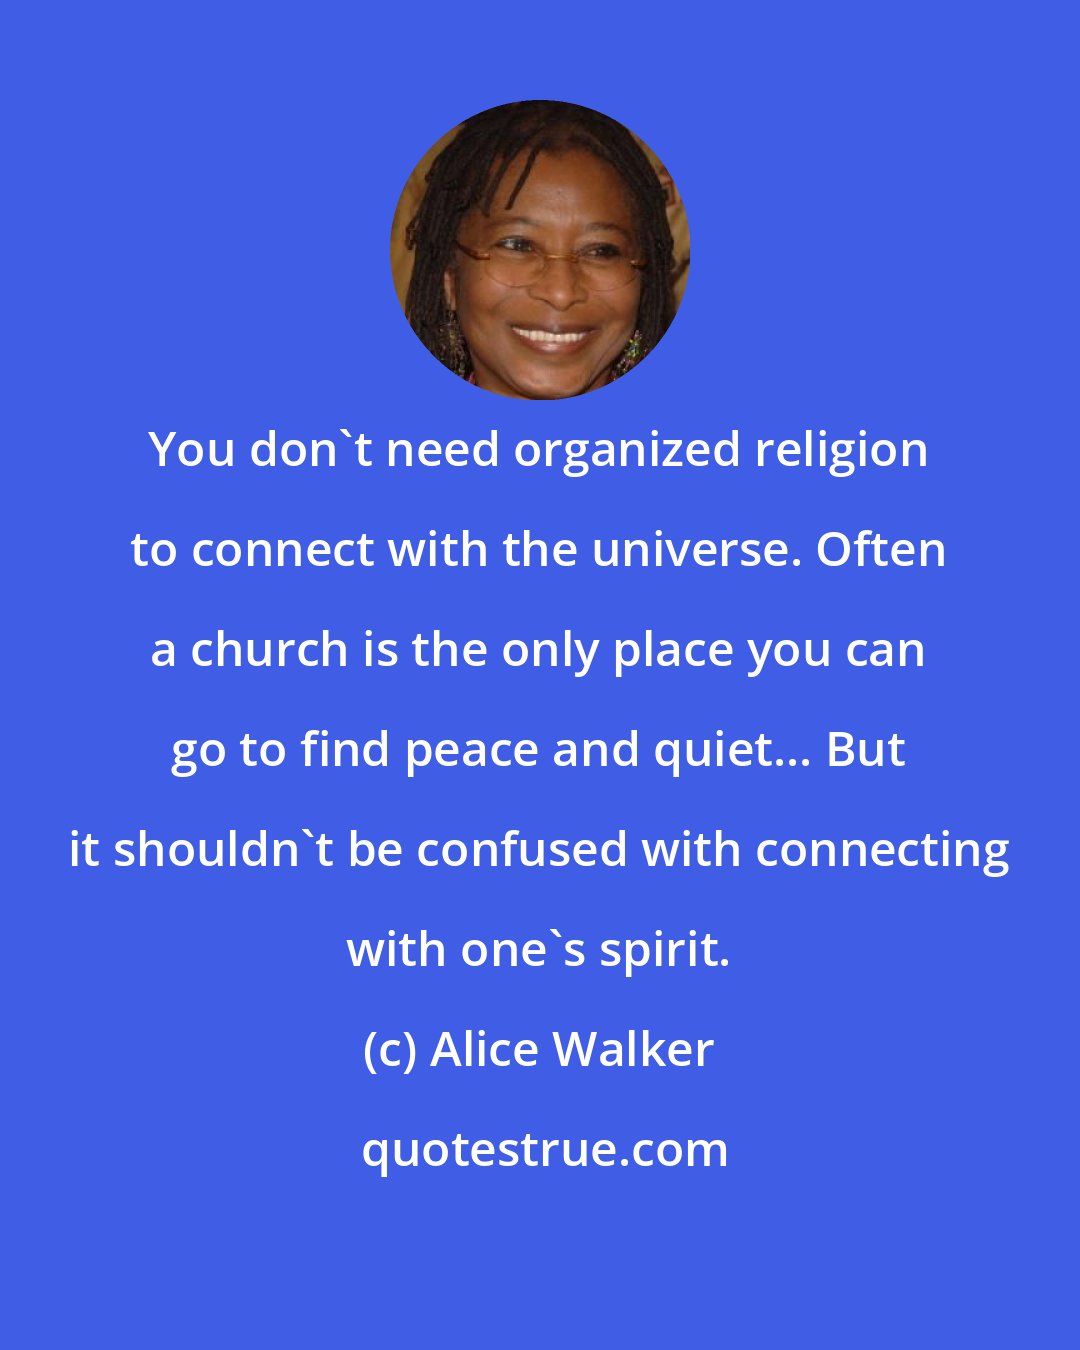 Alice Walker: You don't need organized religion to connect with the universe. Often a church is the only place you can go to find peace and quiet... But it shouldn't be confused with connecting with one's spirit.